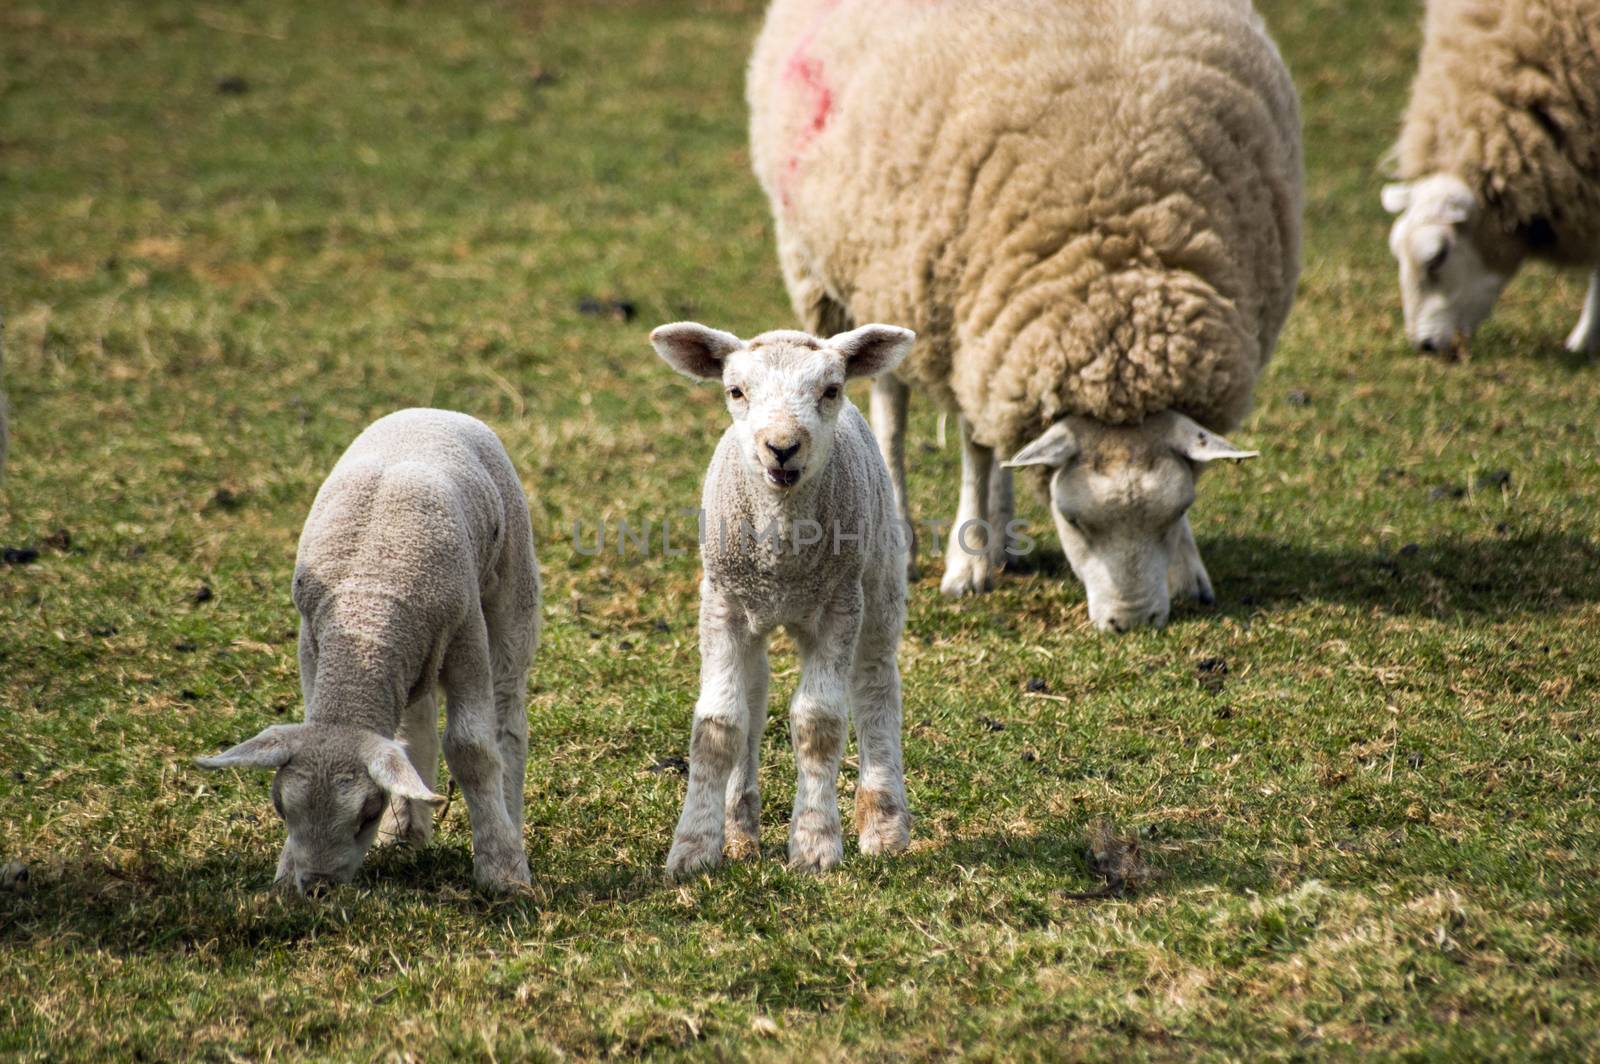 A curious lamb gazes at the viewer as its twin and other sheep continue grazing in a field.